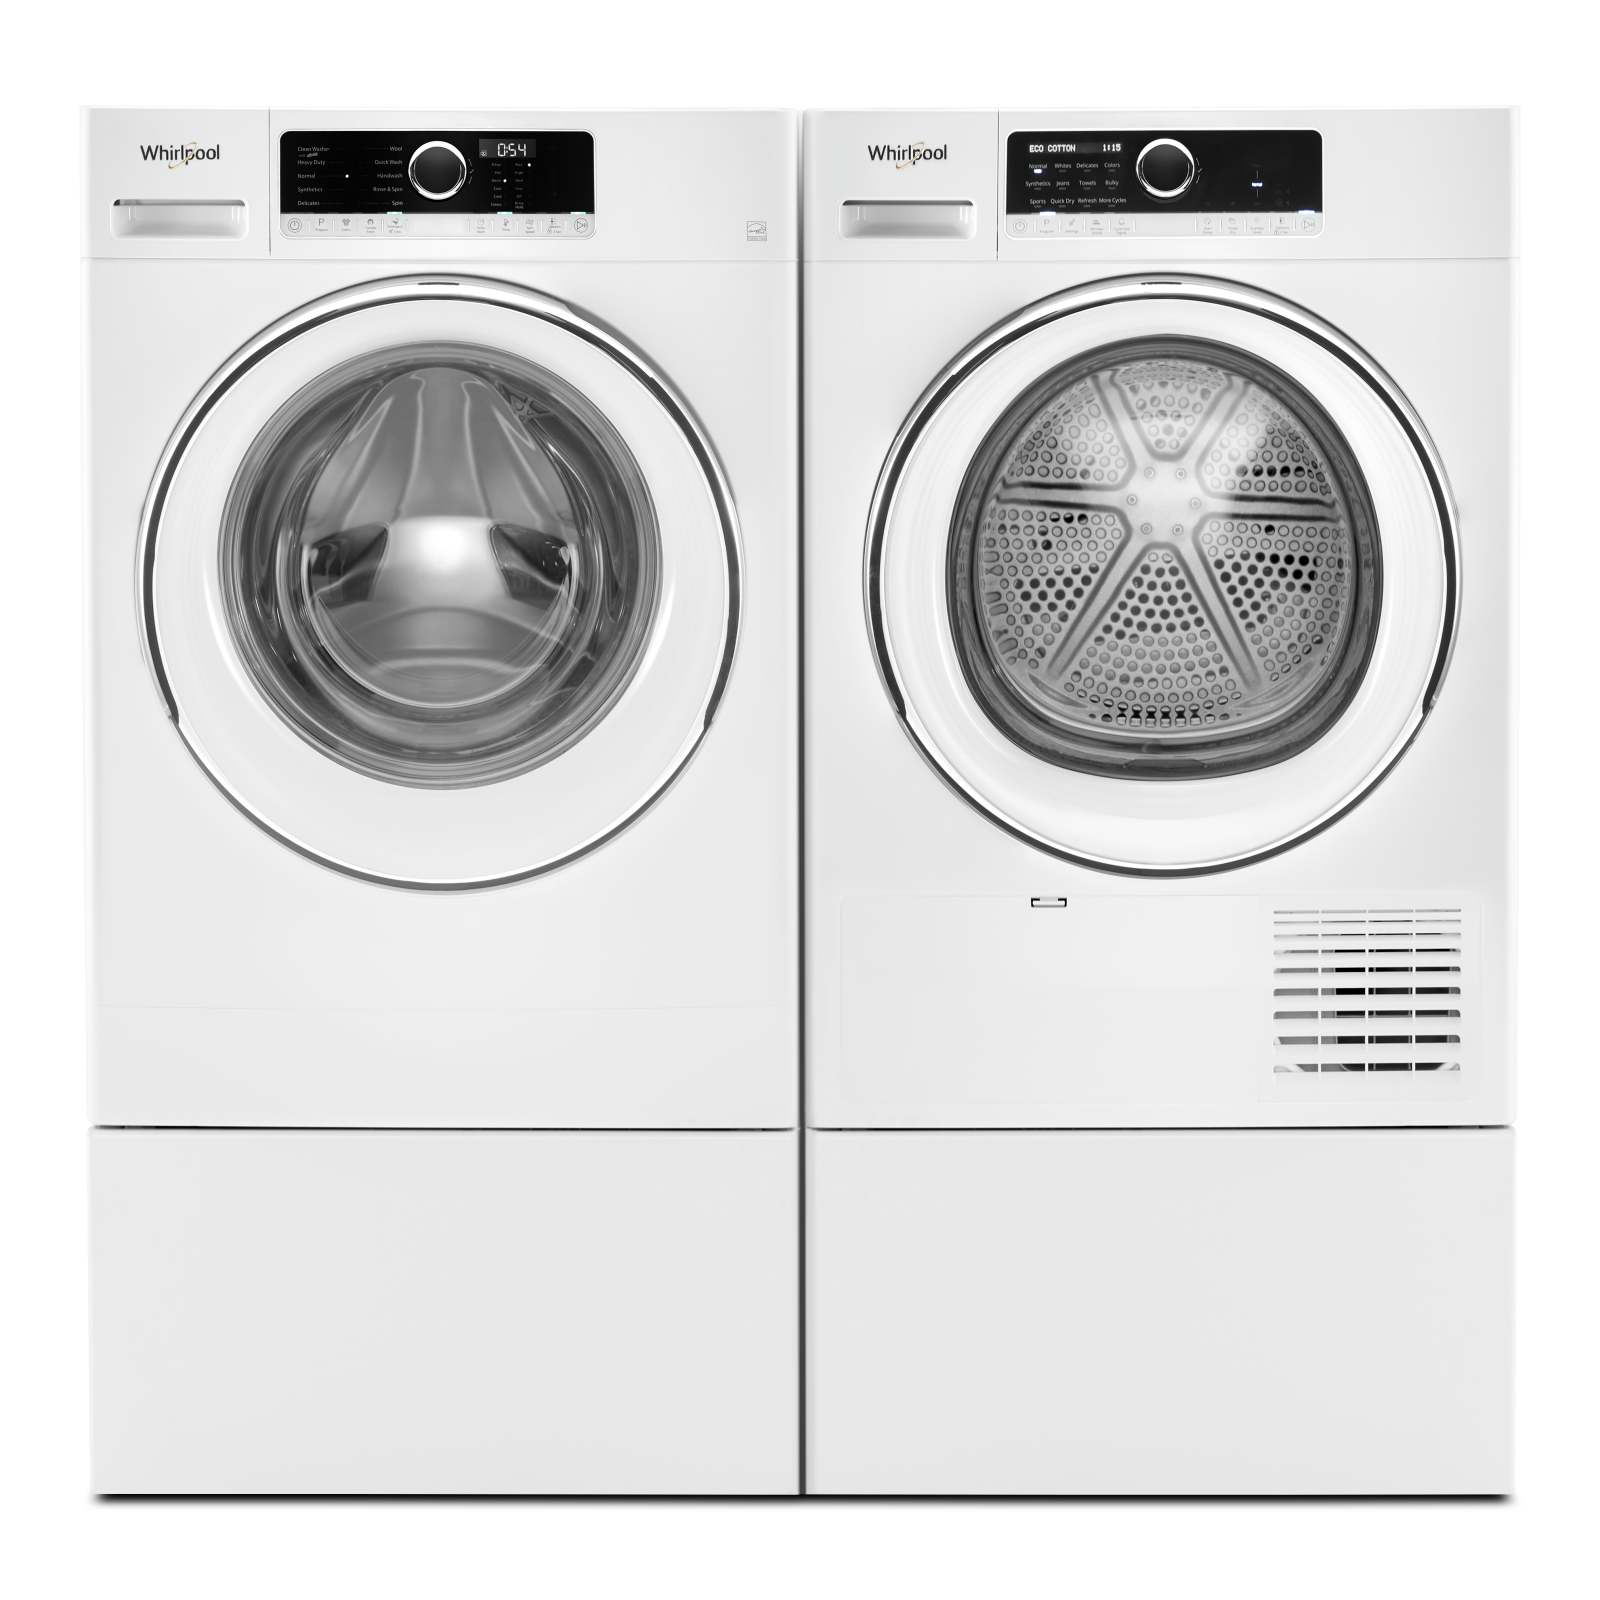 Whirlpool -  24" Pedestal Washer And Dryer  Accessories in White - WFP24GW